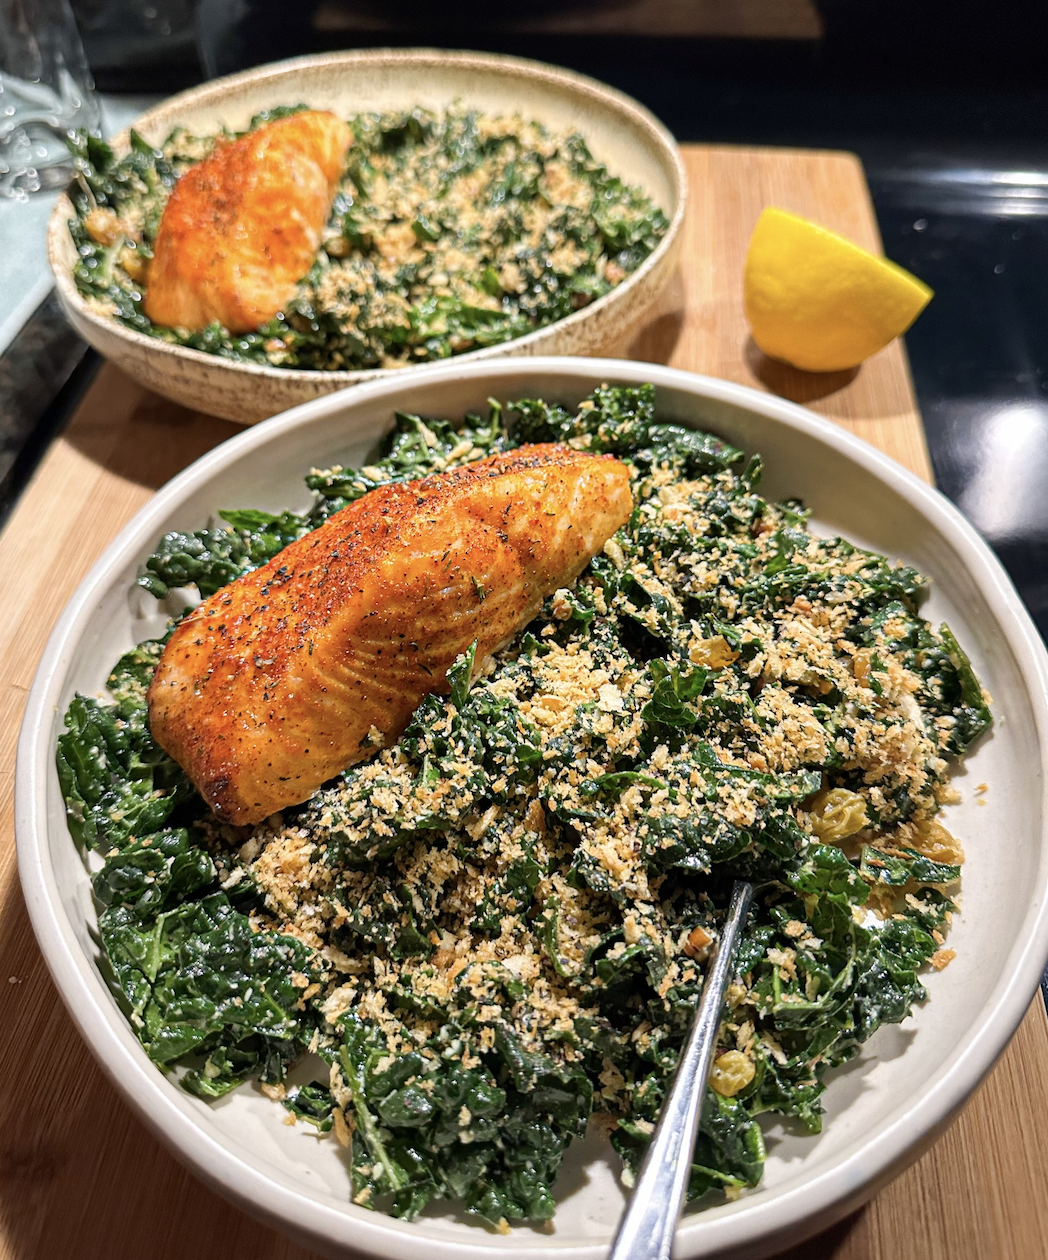 Salad topped with cheese, bread crumbs, and air-fried salmon